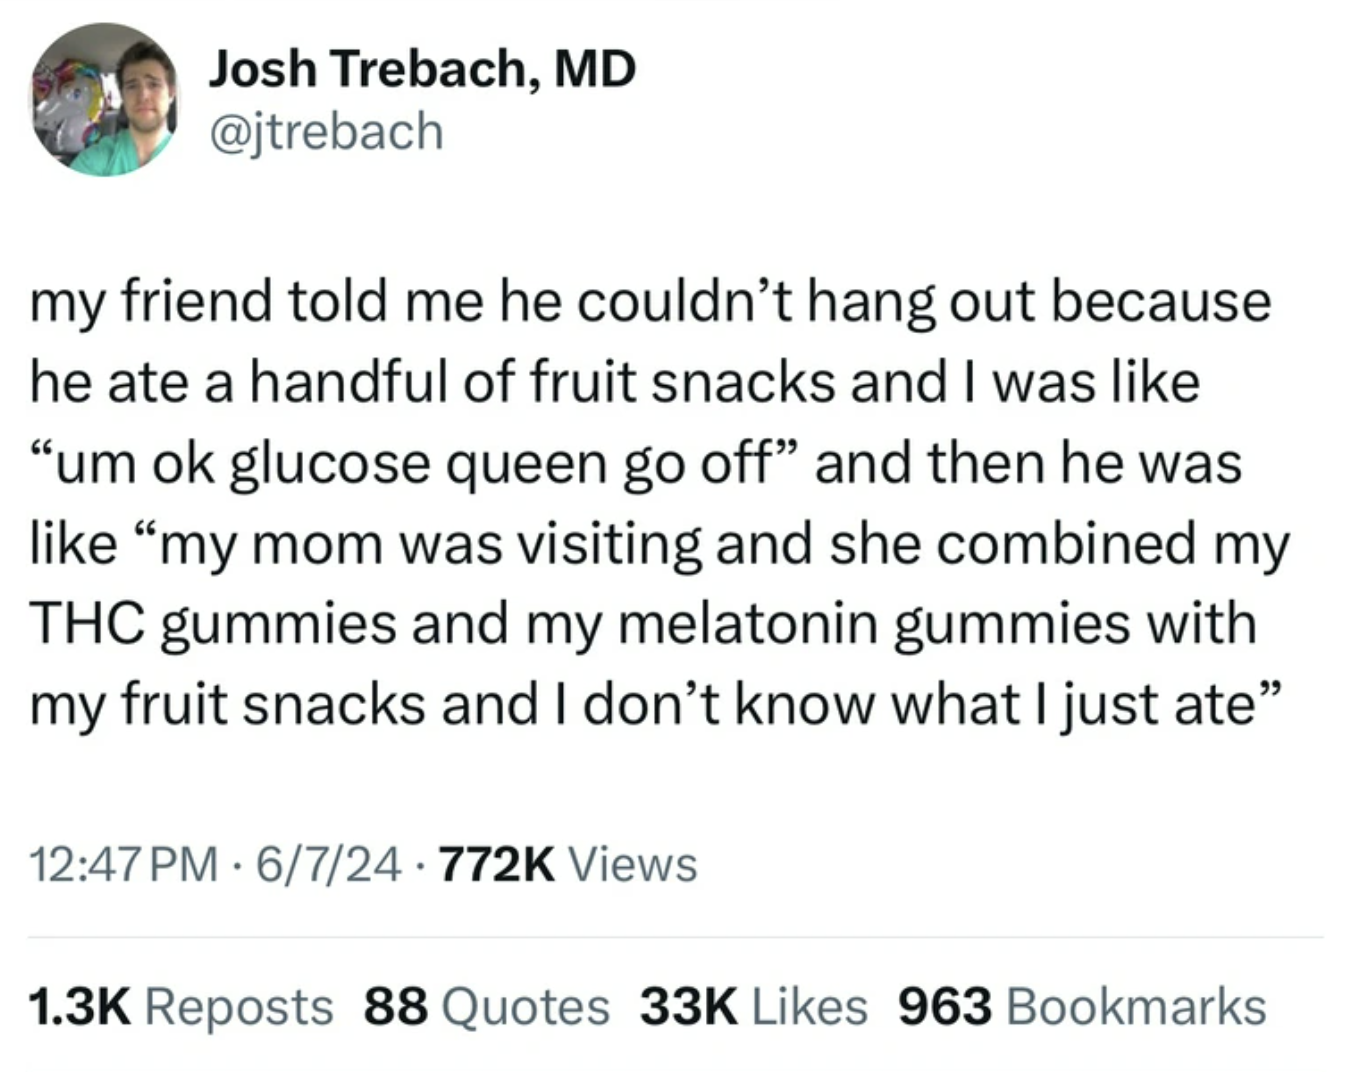 screenshot - Josh Trebach, Md my friend told me he couldn't hang out because he ate a handful of fruit snacks and I was "um ok glucose queen go off" and then he was "my mom was visiting and she combined my Thc gummies and my melatonin gummies with my frui